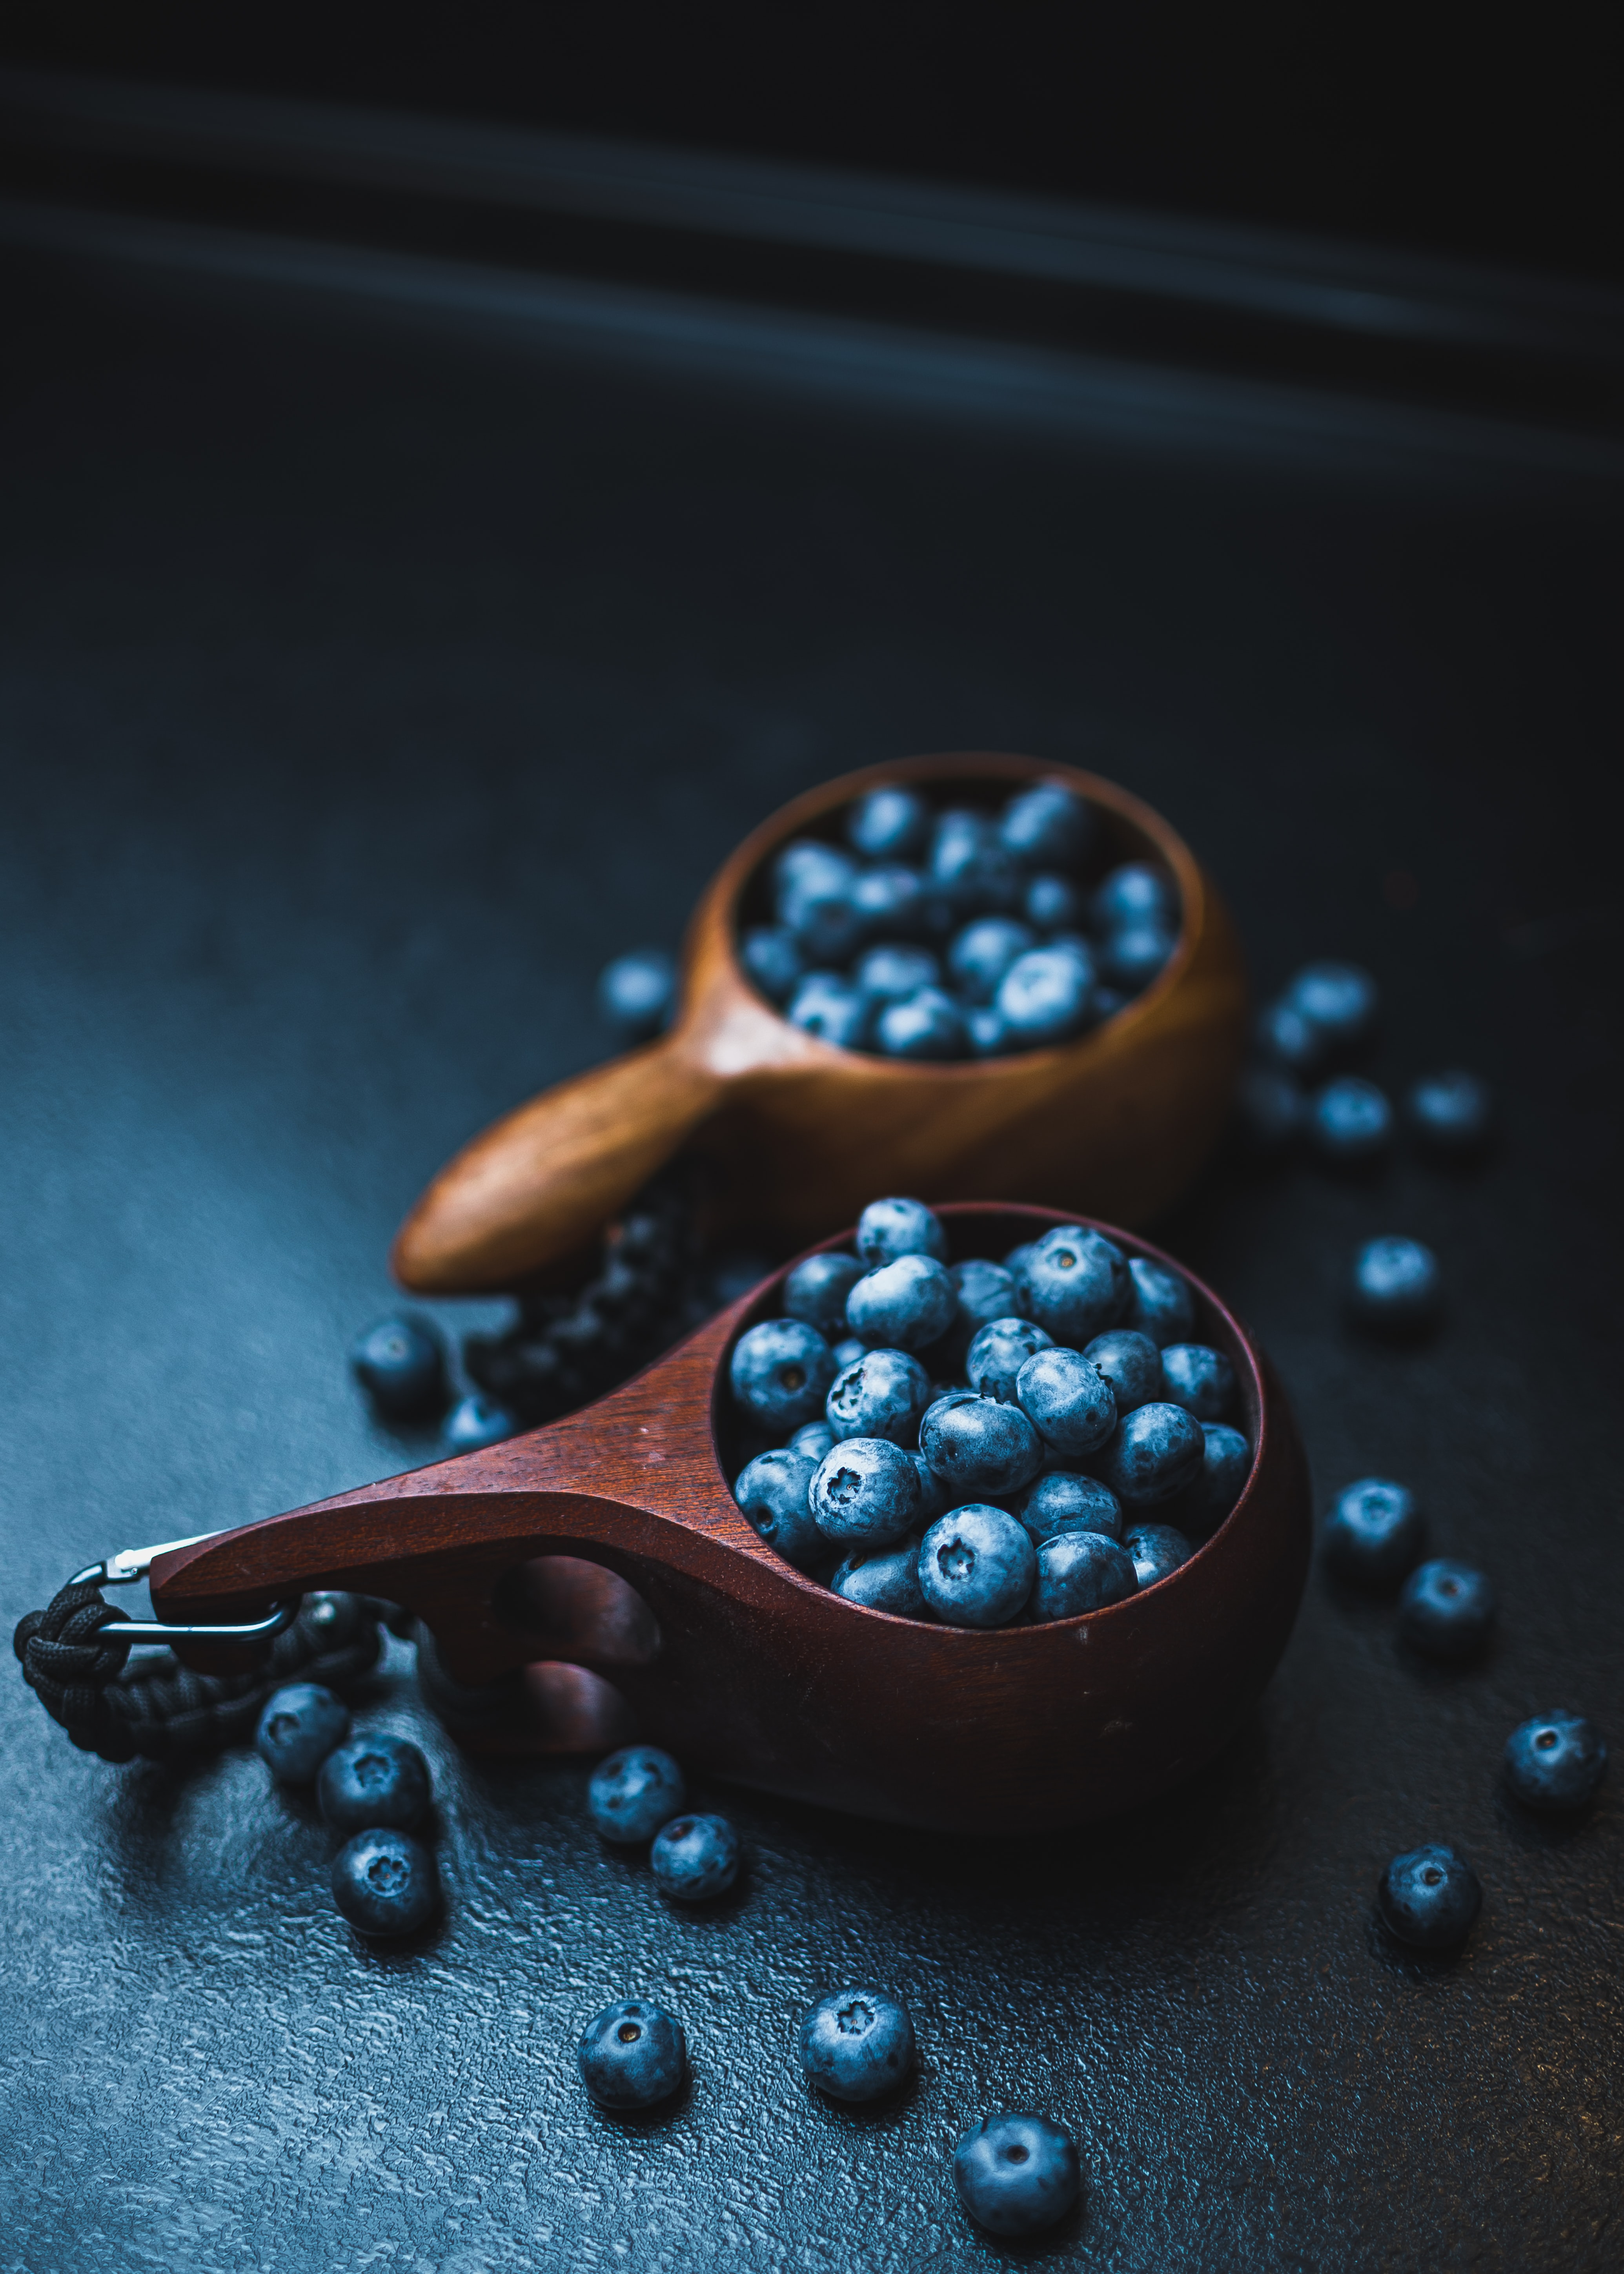 cup, bilberries, fruits, food, wood, wooden, berry